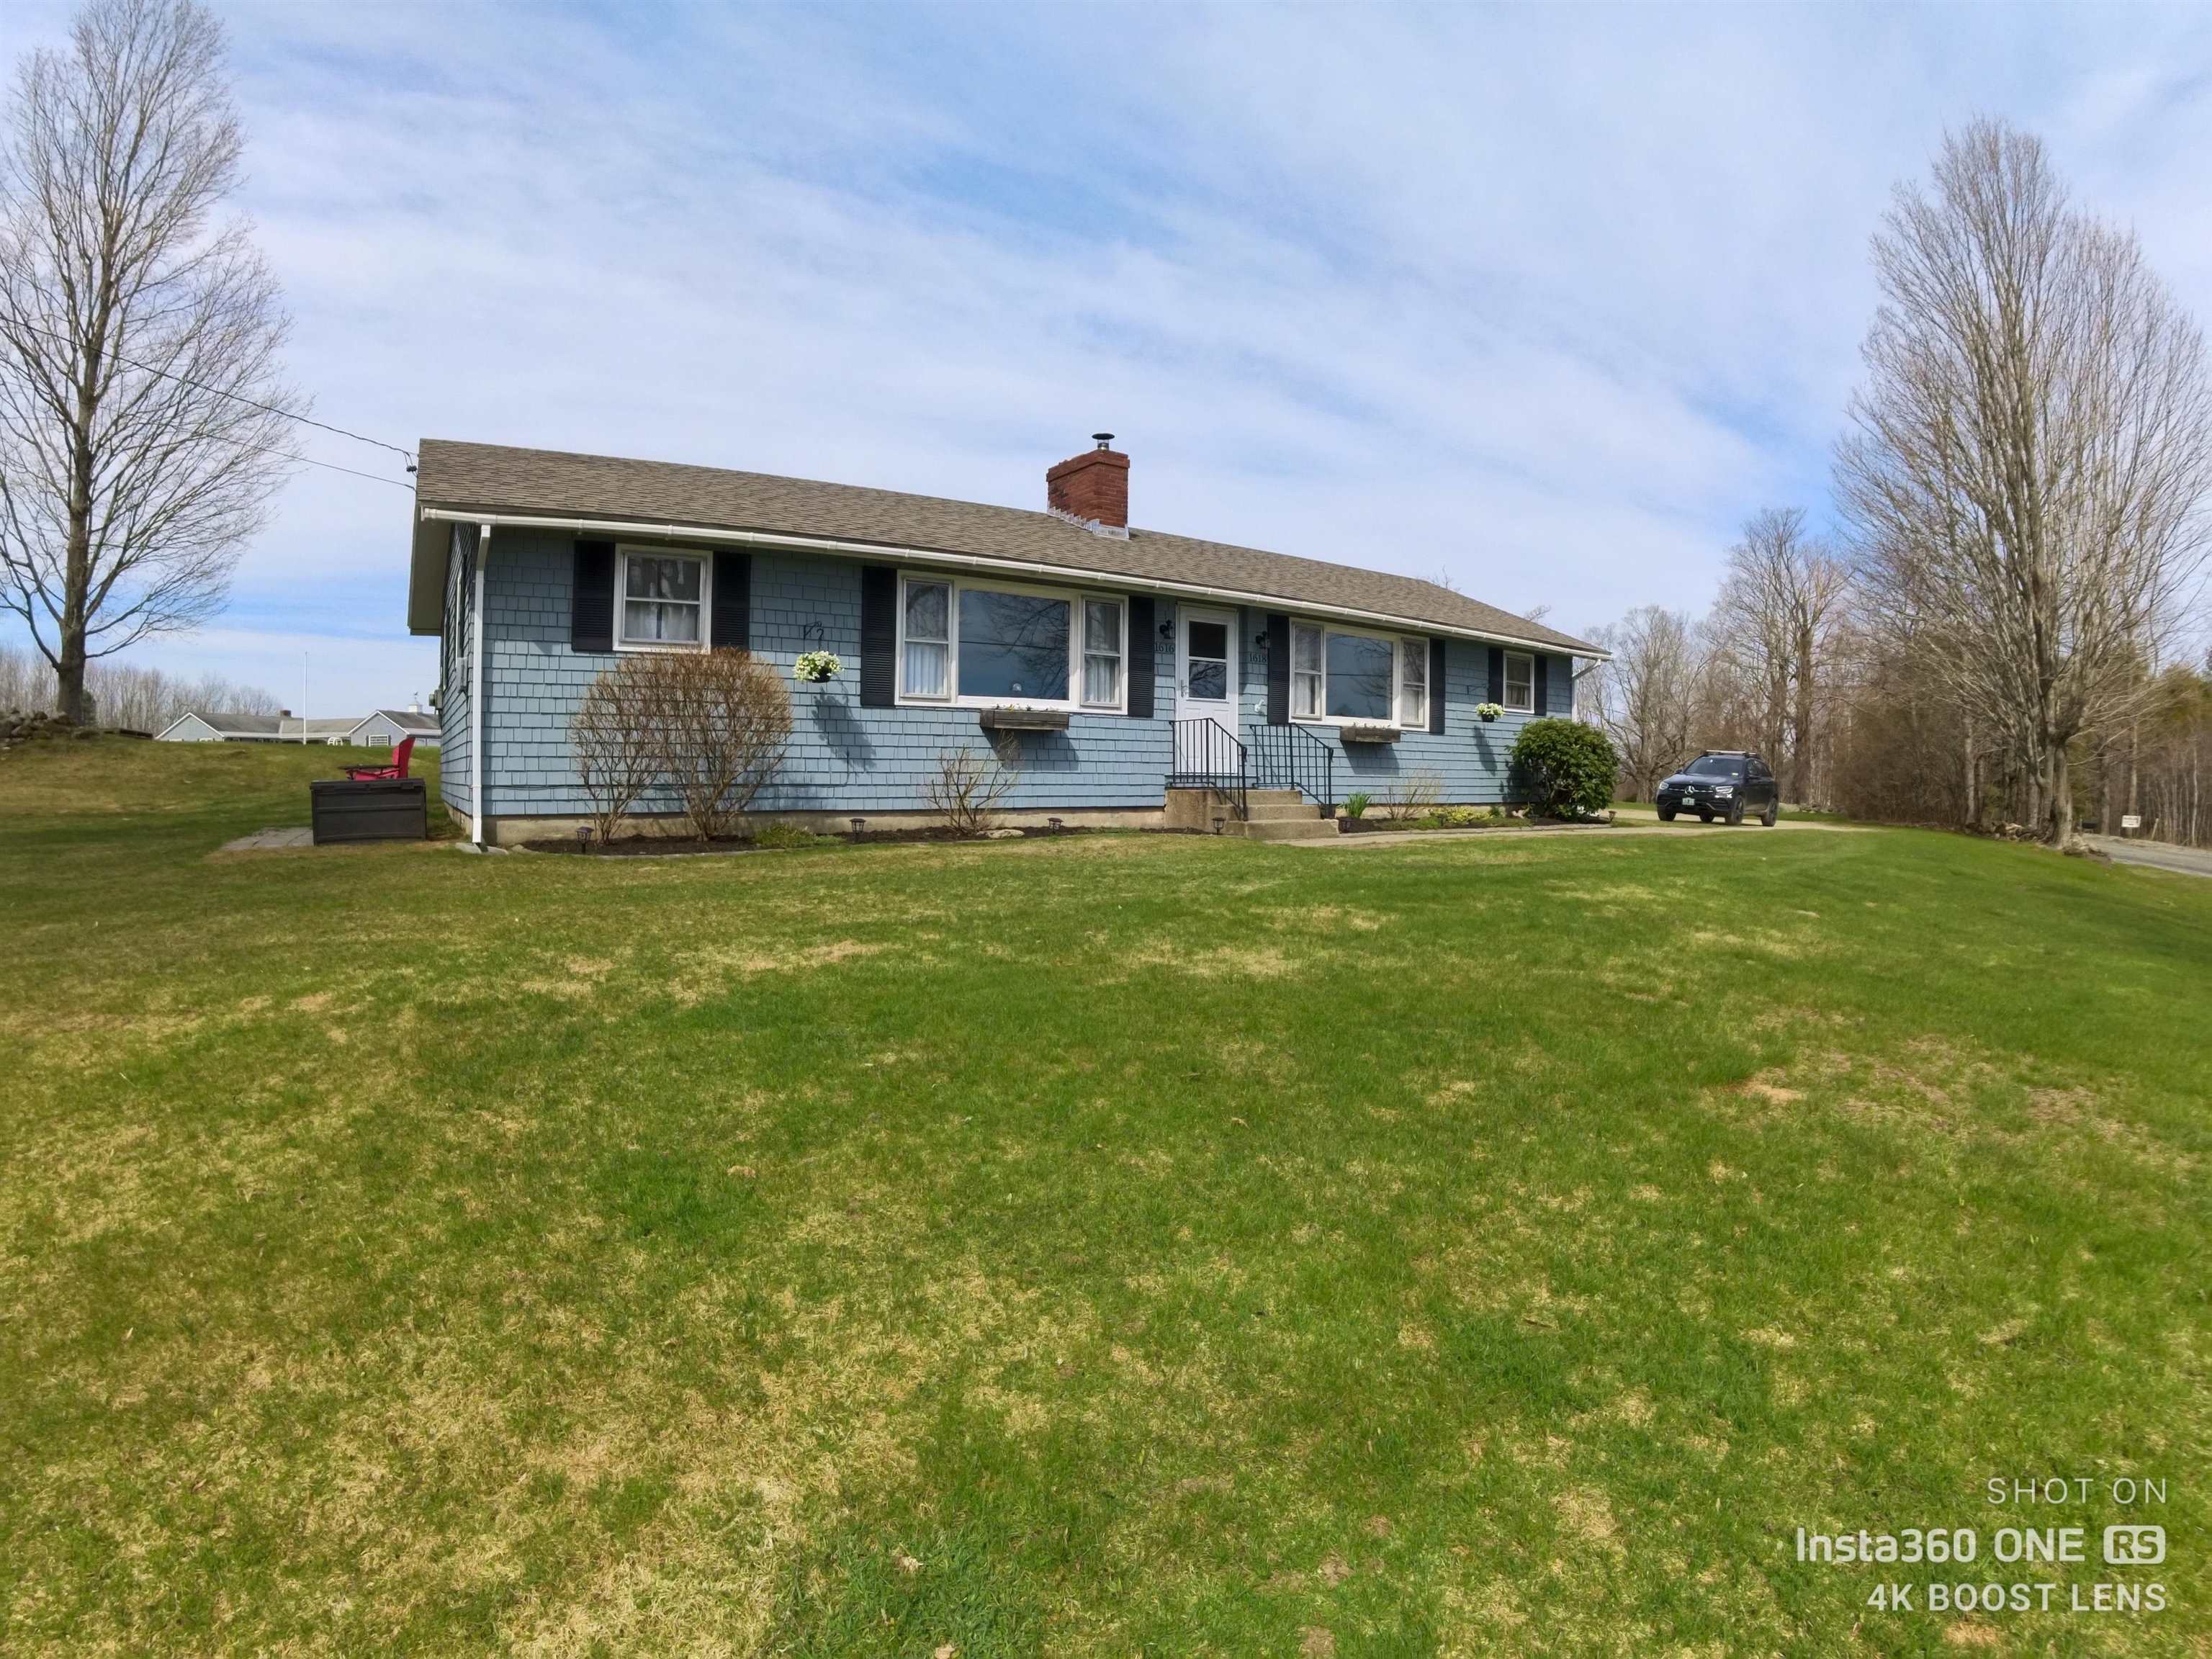 image of Weathersfield VT Home | sq.ft. 1296 